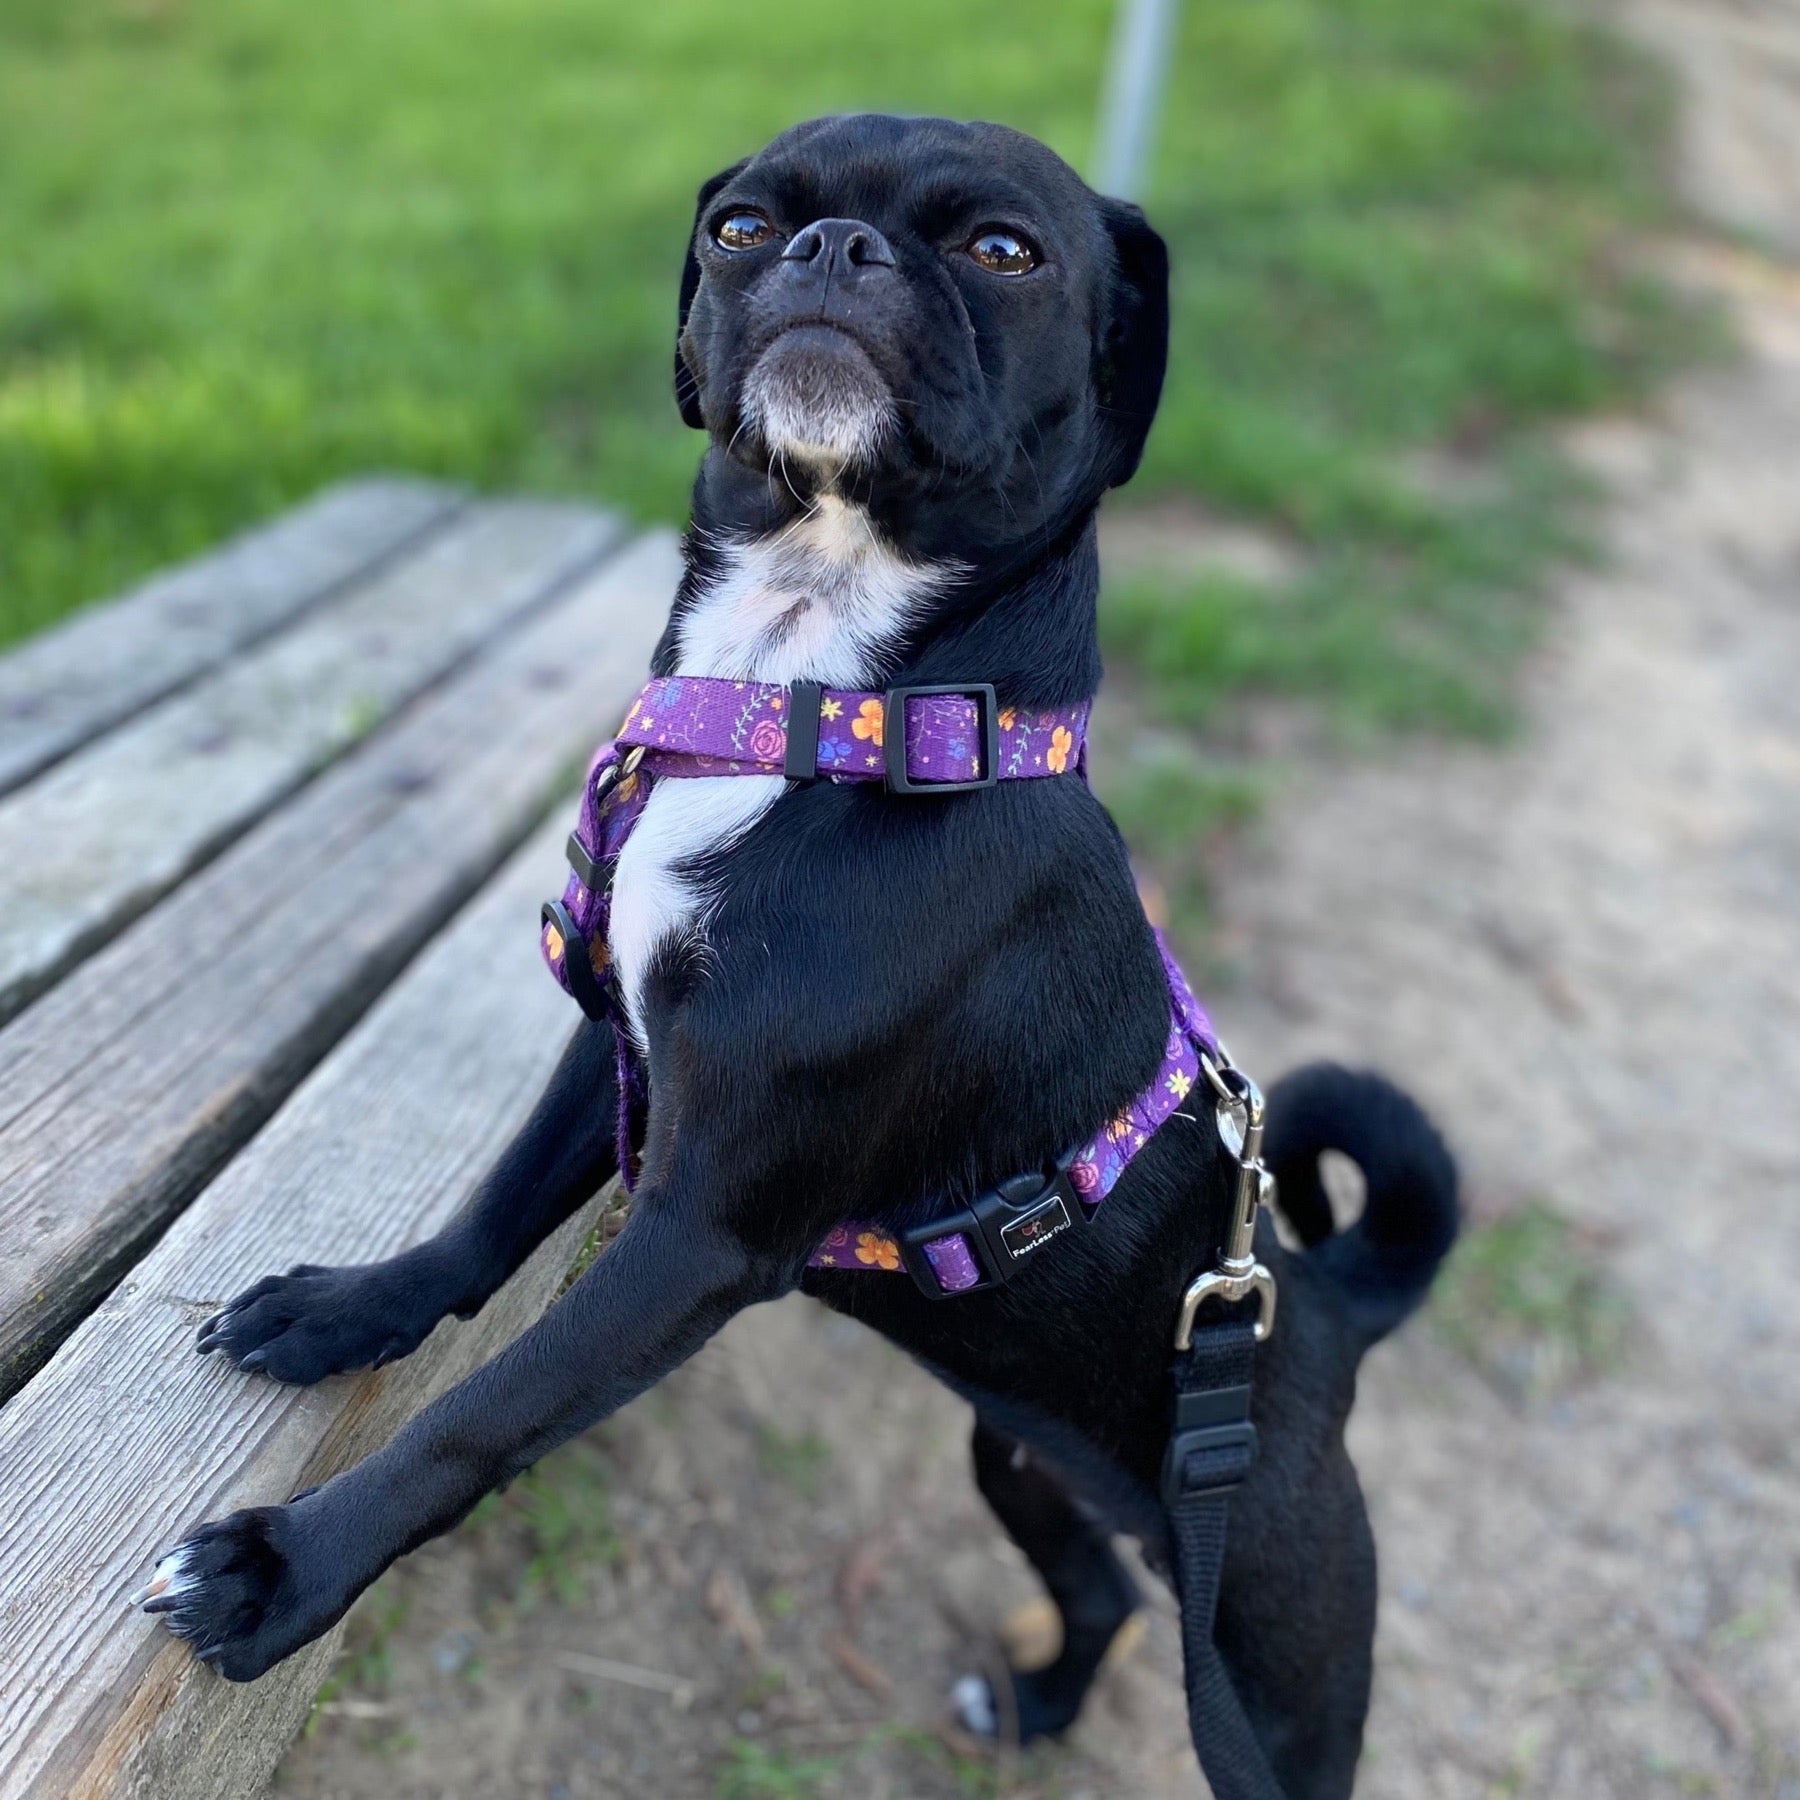 a photo of a black pug mix wearing a purple floral harness with front paws up on a bench